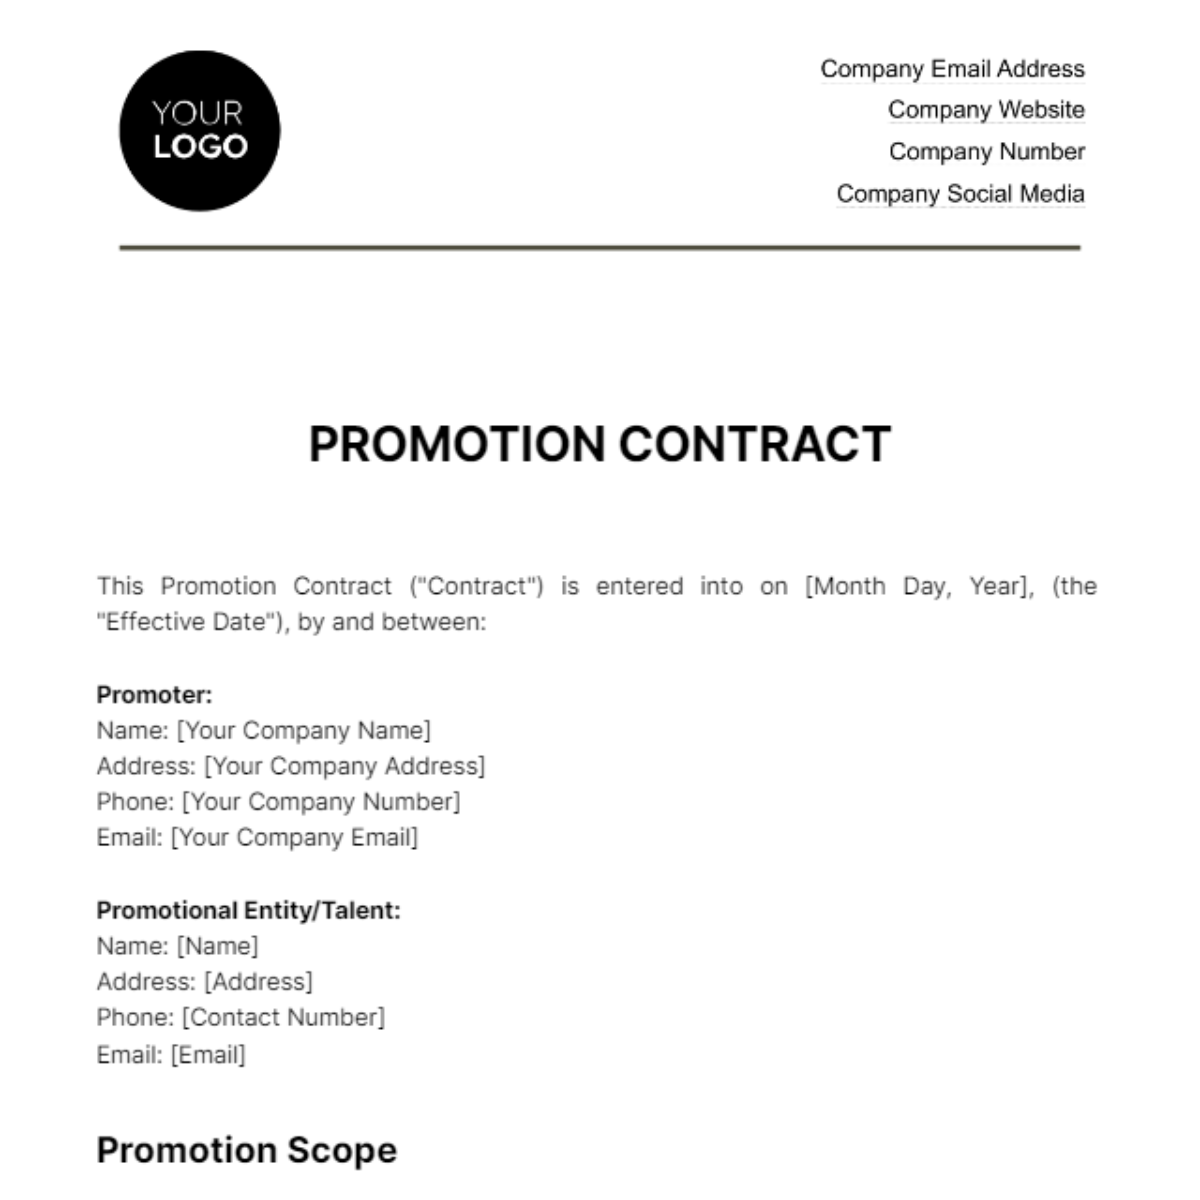 Promotion Contract HR Template